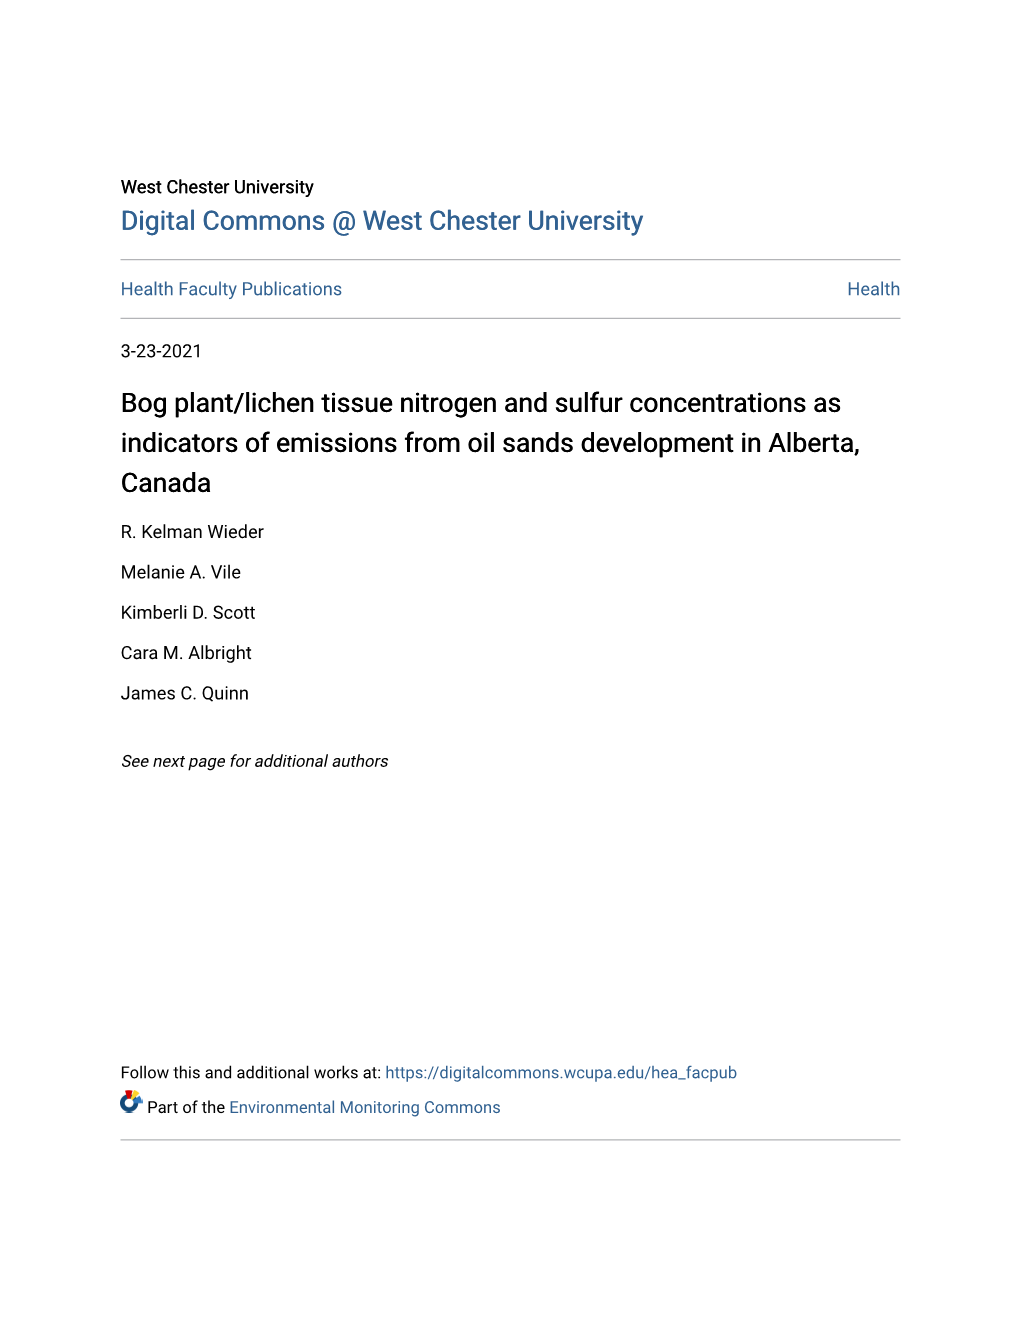 Bog Plant/Lichen Tissue Nitrogen and Sulfur Concentrations As Indicators of Emissions from Oil Sands Development in Alberta, Canada